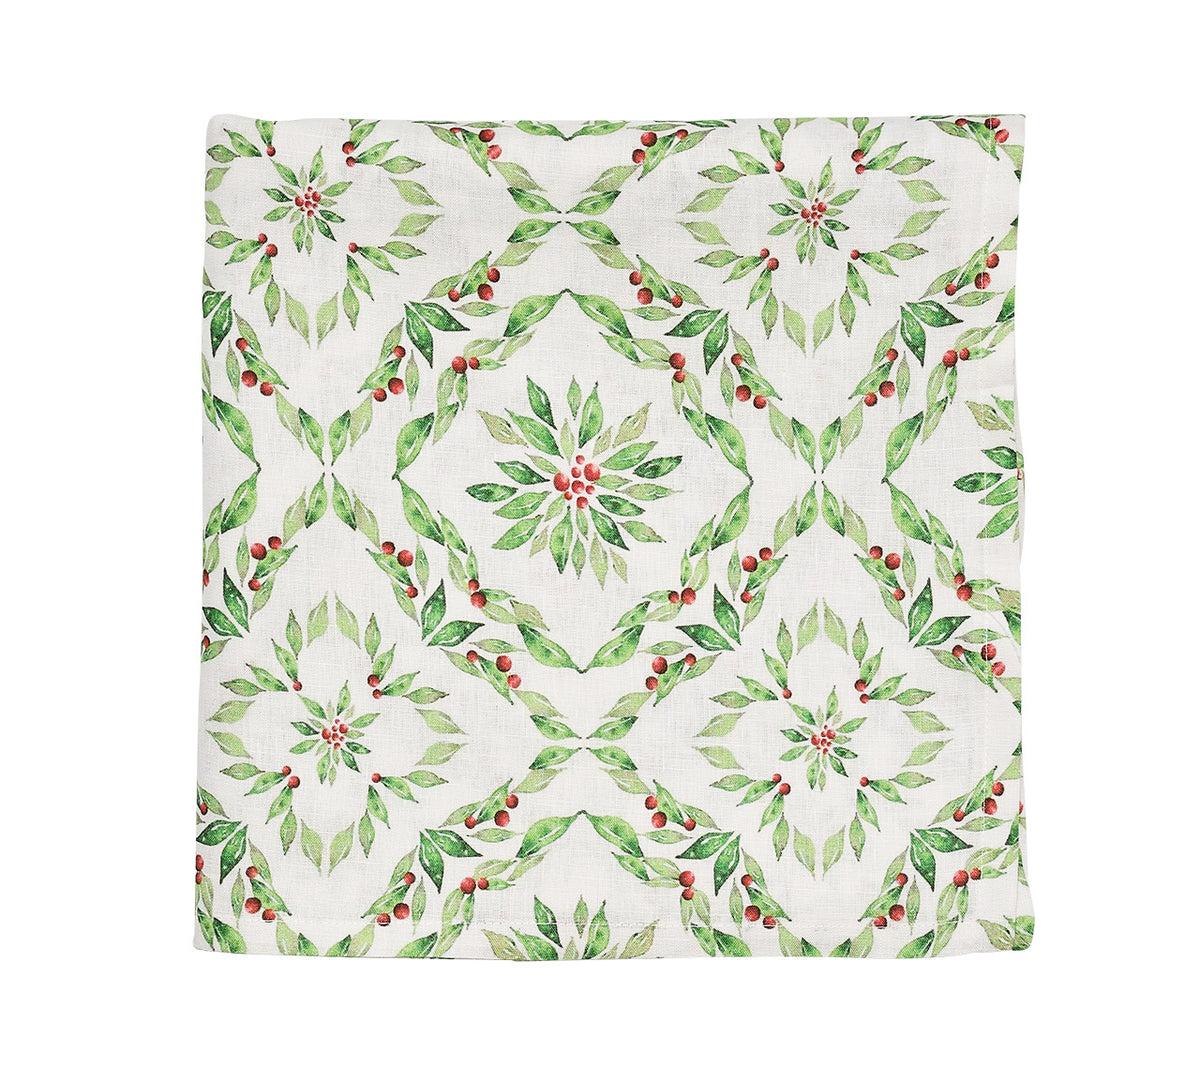 Laurel Tablecloth in White & Green